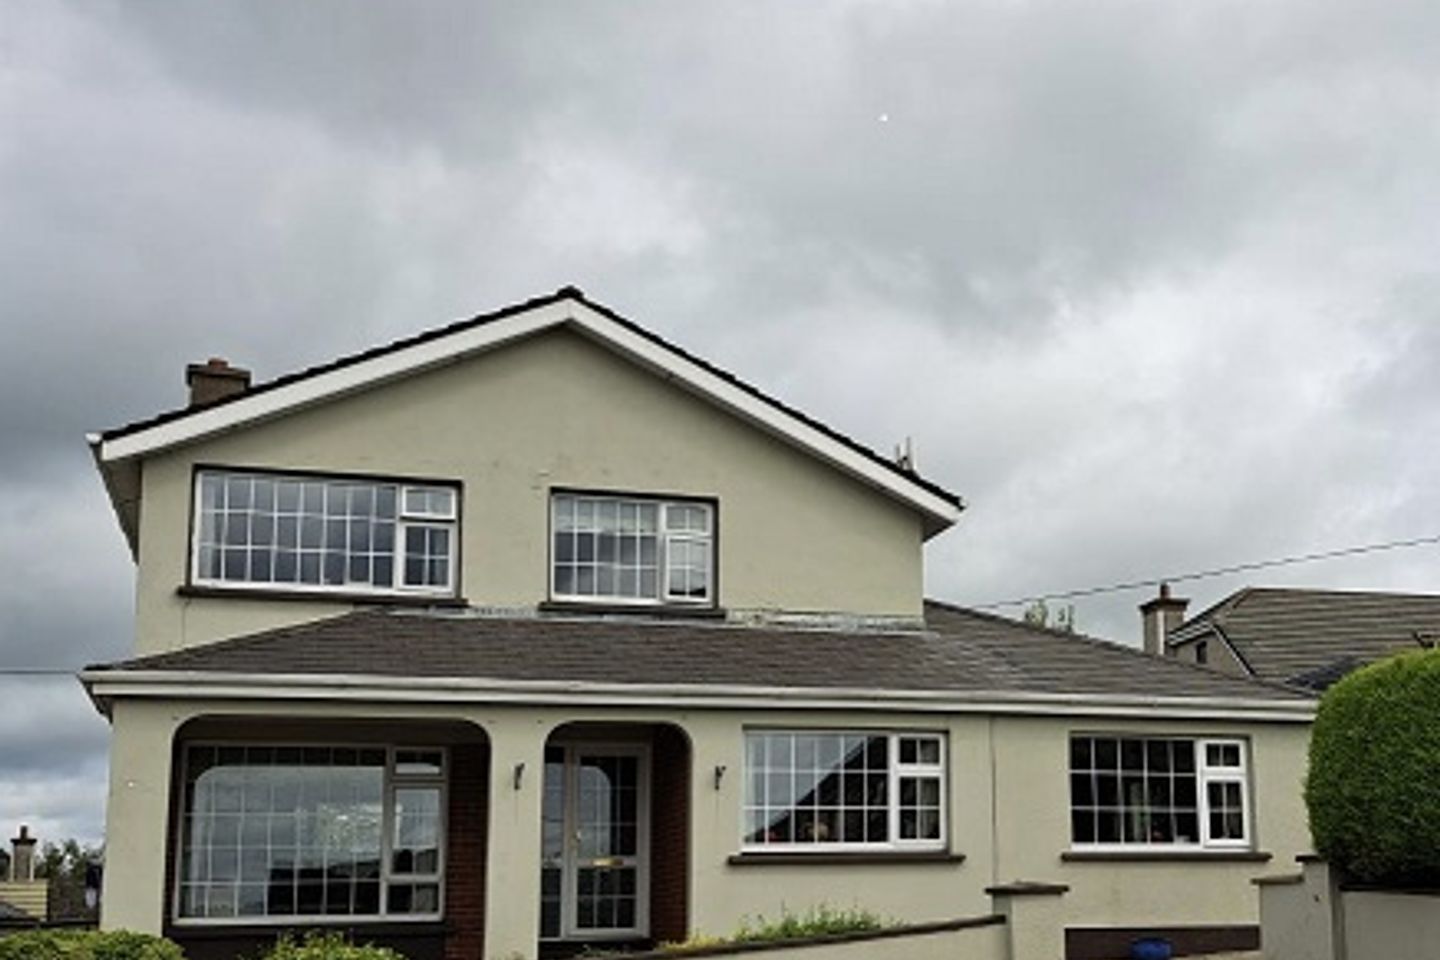 46 Mountross, New Ross, Co. Wexford, Y34NH79